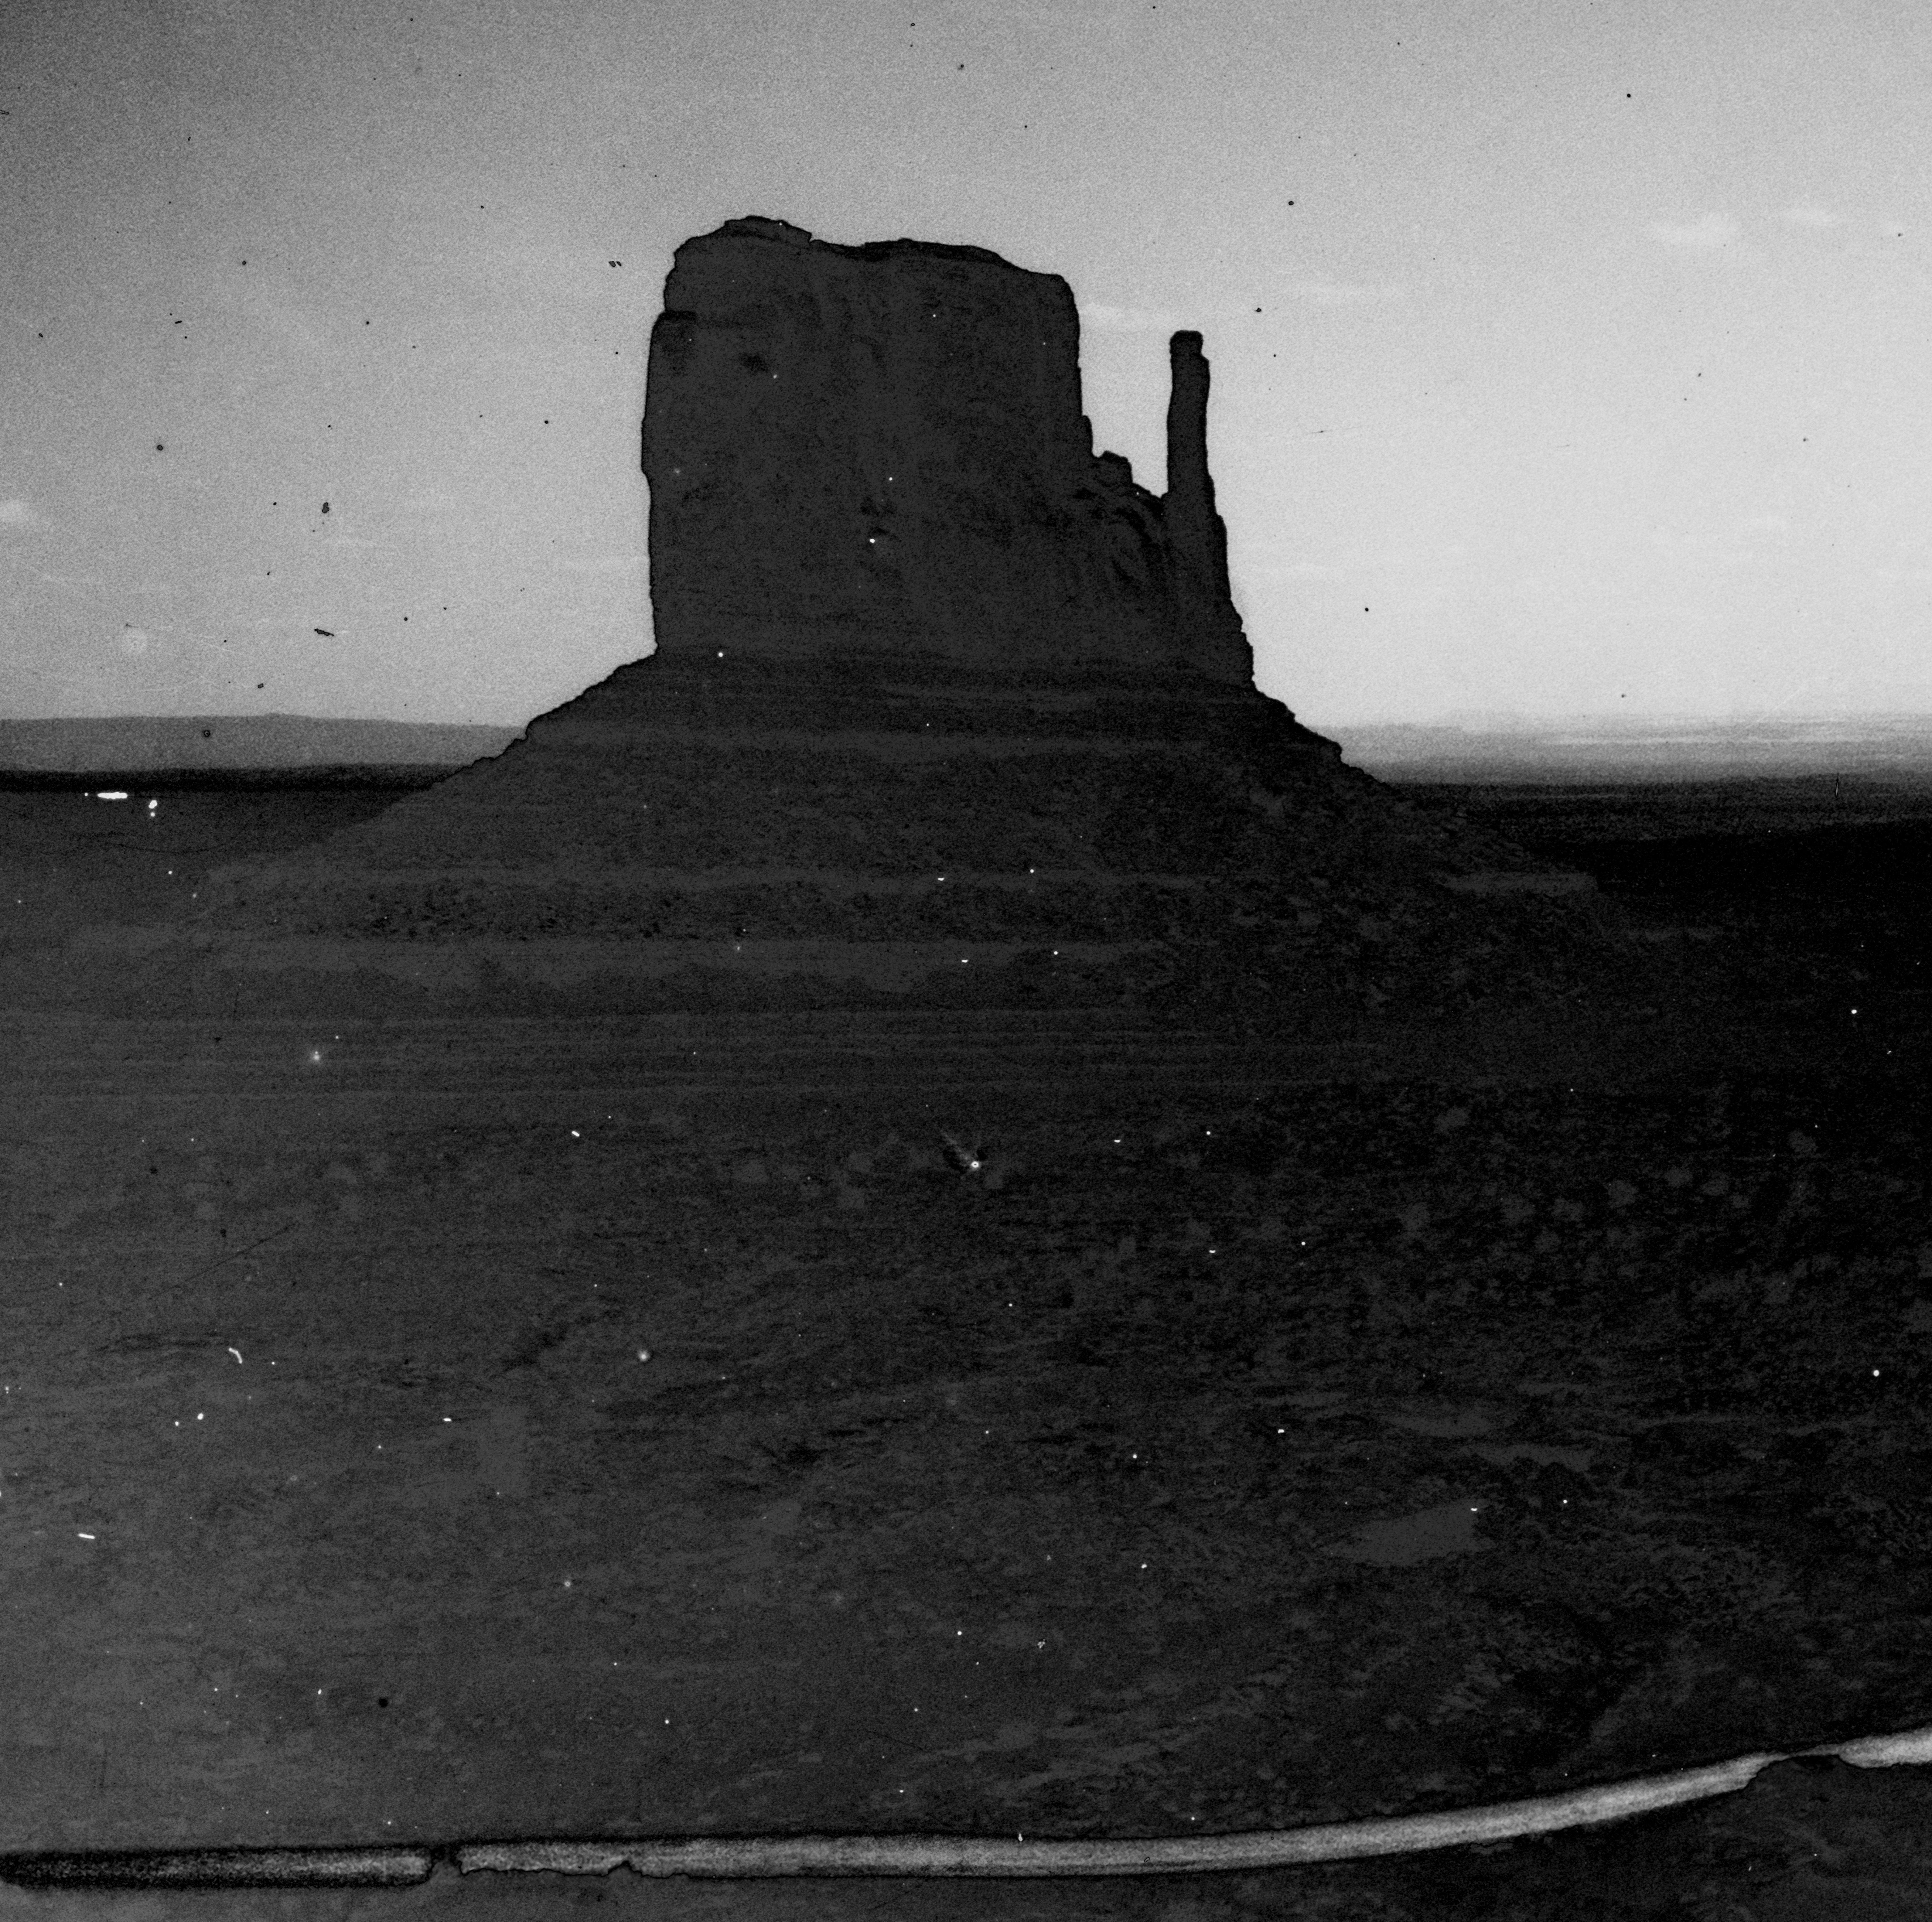 Monument Valley - analogue black and white desert photography 30x45cm - Photograph by Ugne Pouwell